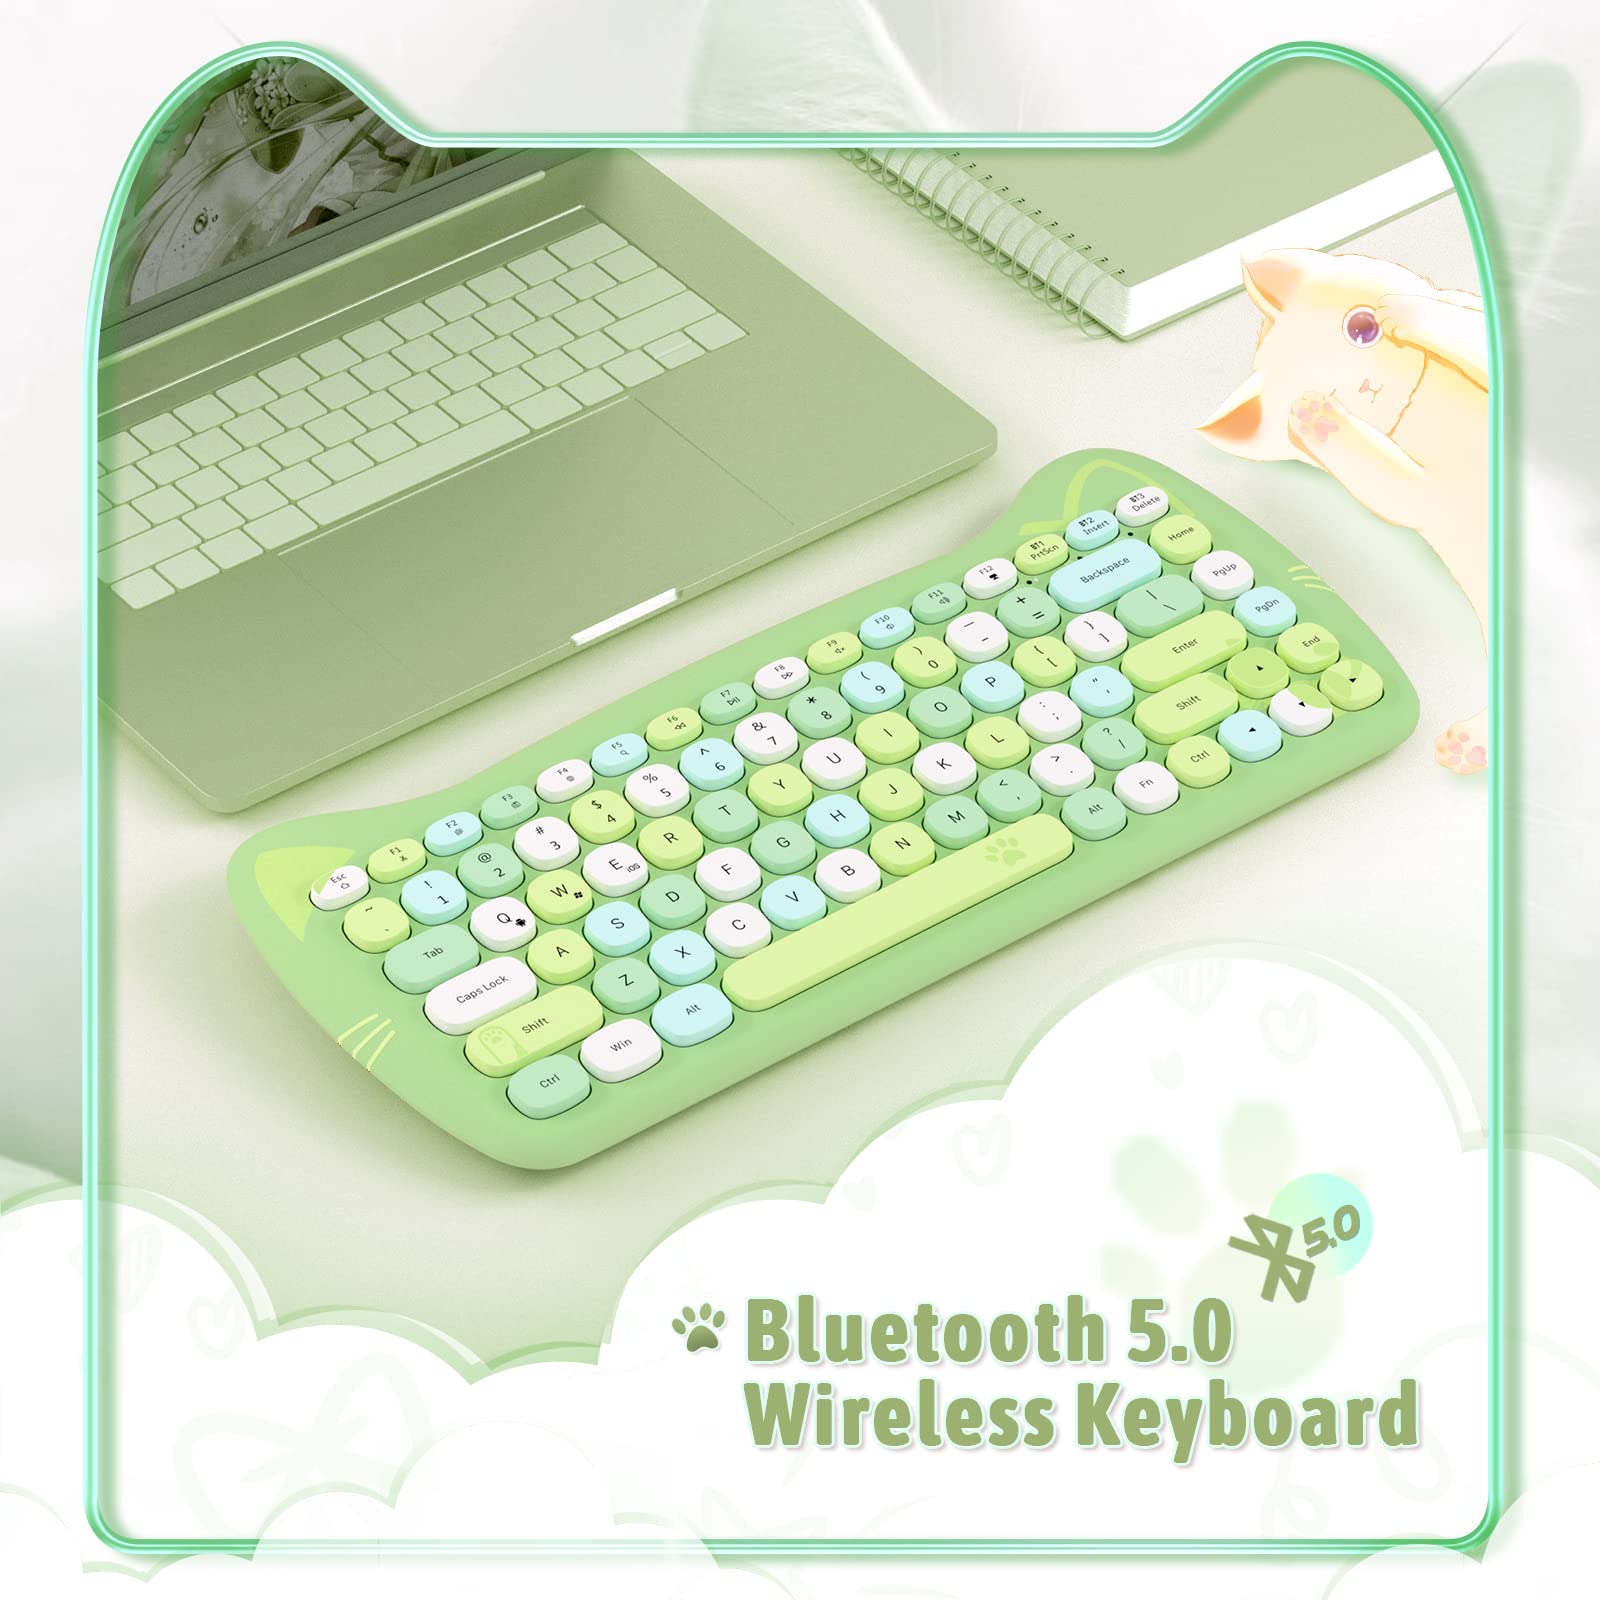 SELORSS Kawaii Wireless Bluetooth Cute Cat Keyboard,Mini Portable 84-Key Retro Round Keycaps,Quiet Click for Typewriter, Home and Office,Compatible with PC/Mac/Notebook/Laptop/Ipad Air(Green Colorful)